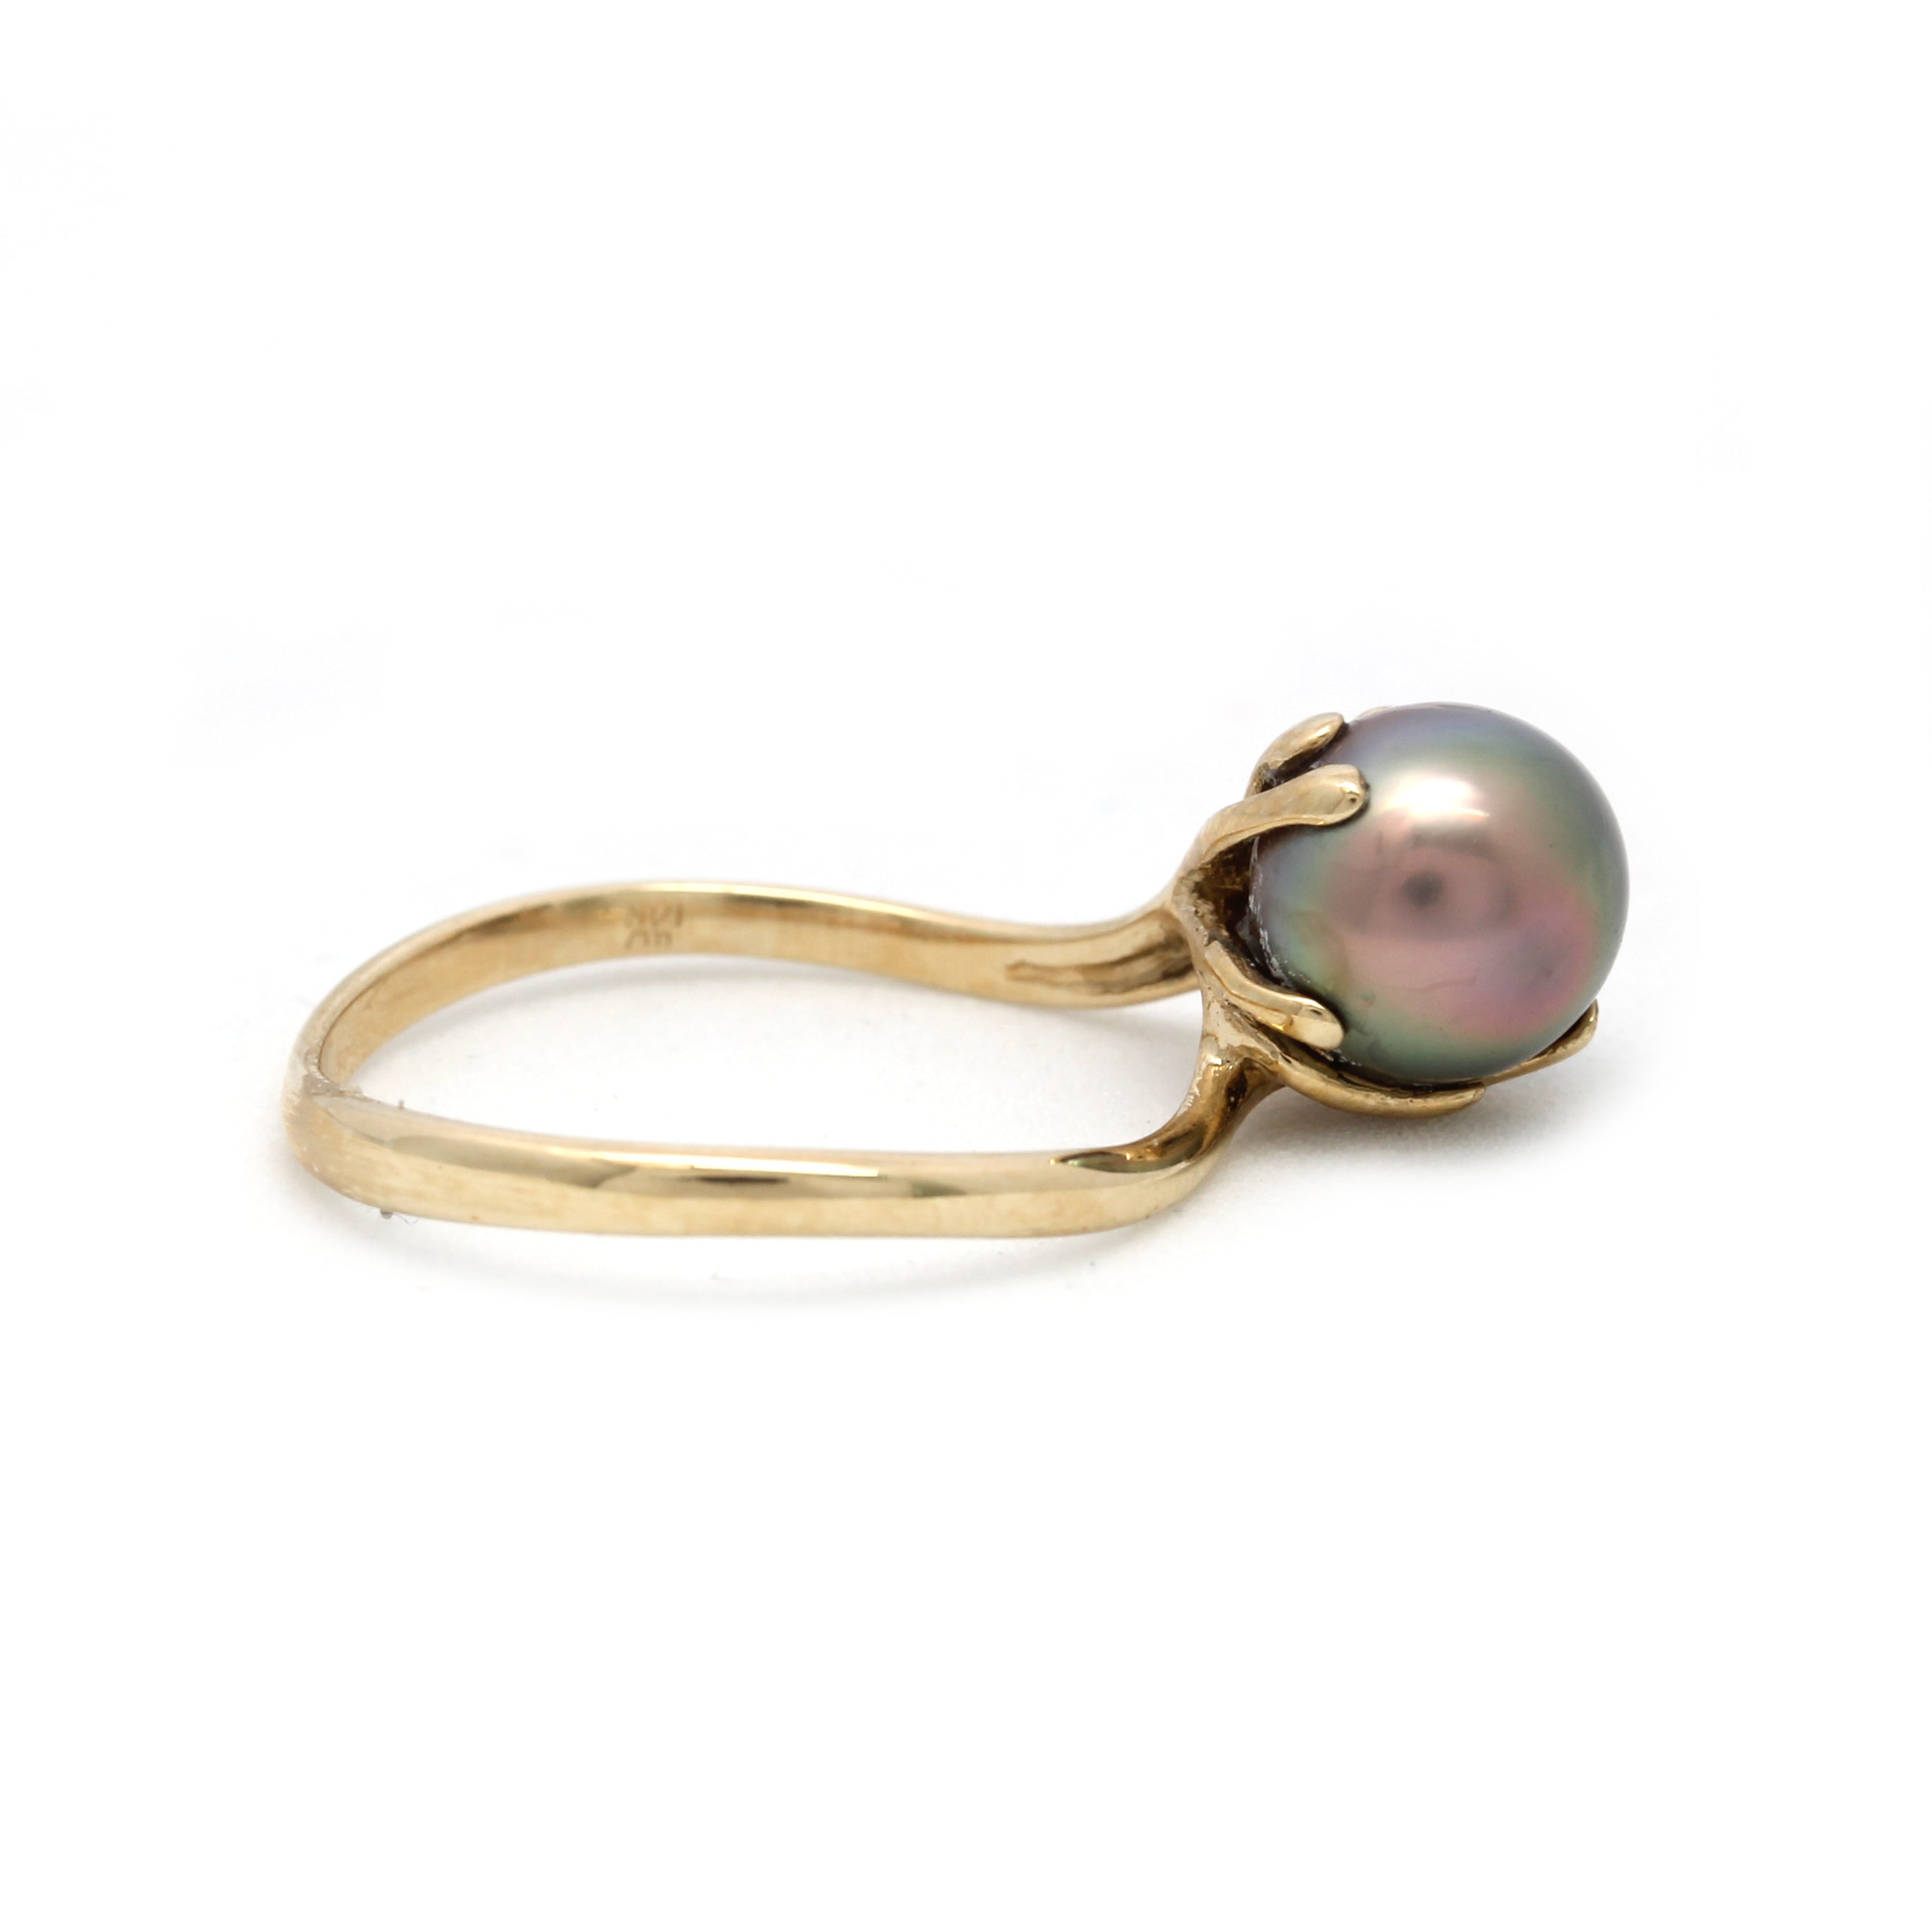 14K Yellow Gold Ring with a Cortez Pearl